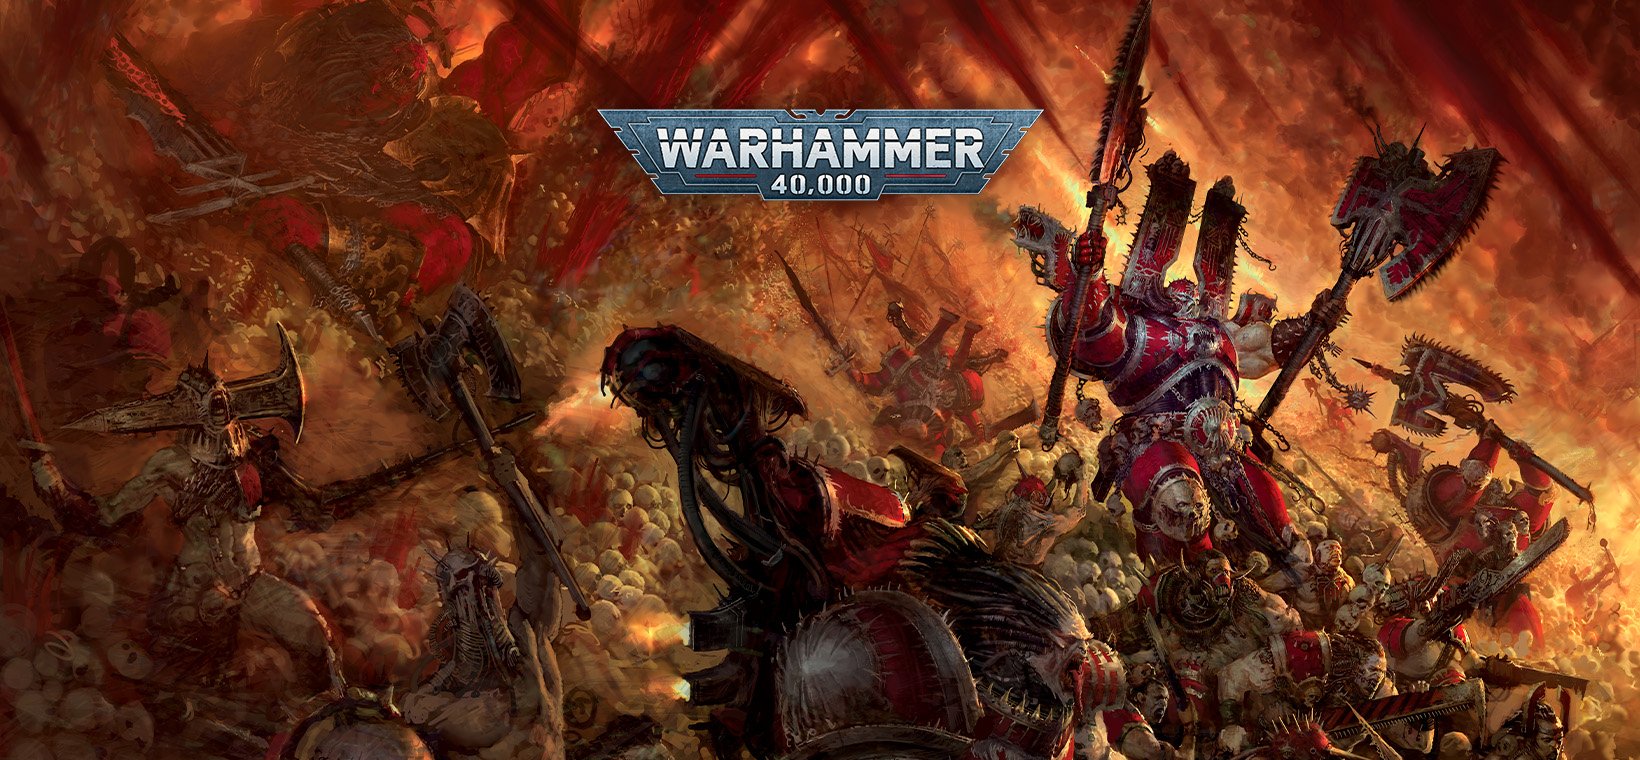 WORLD EATERS